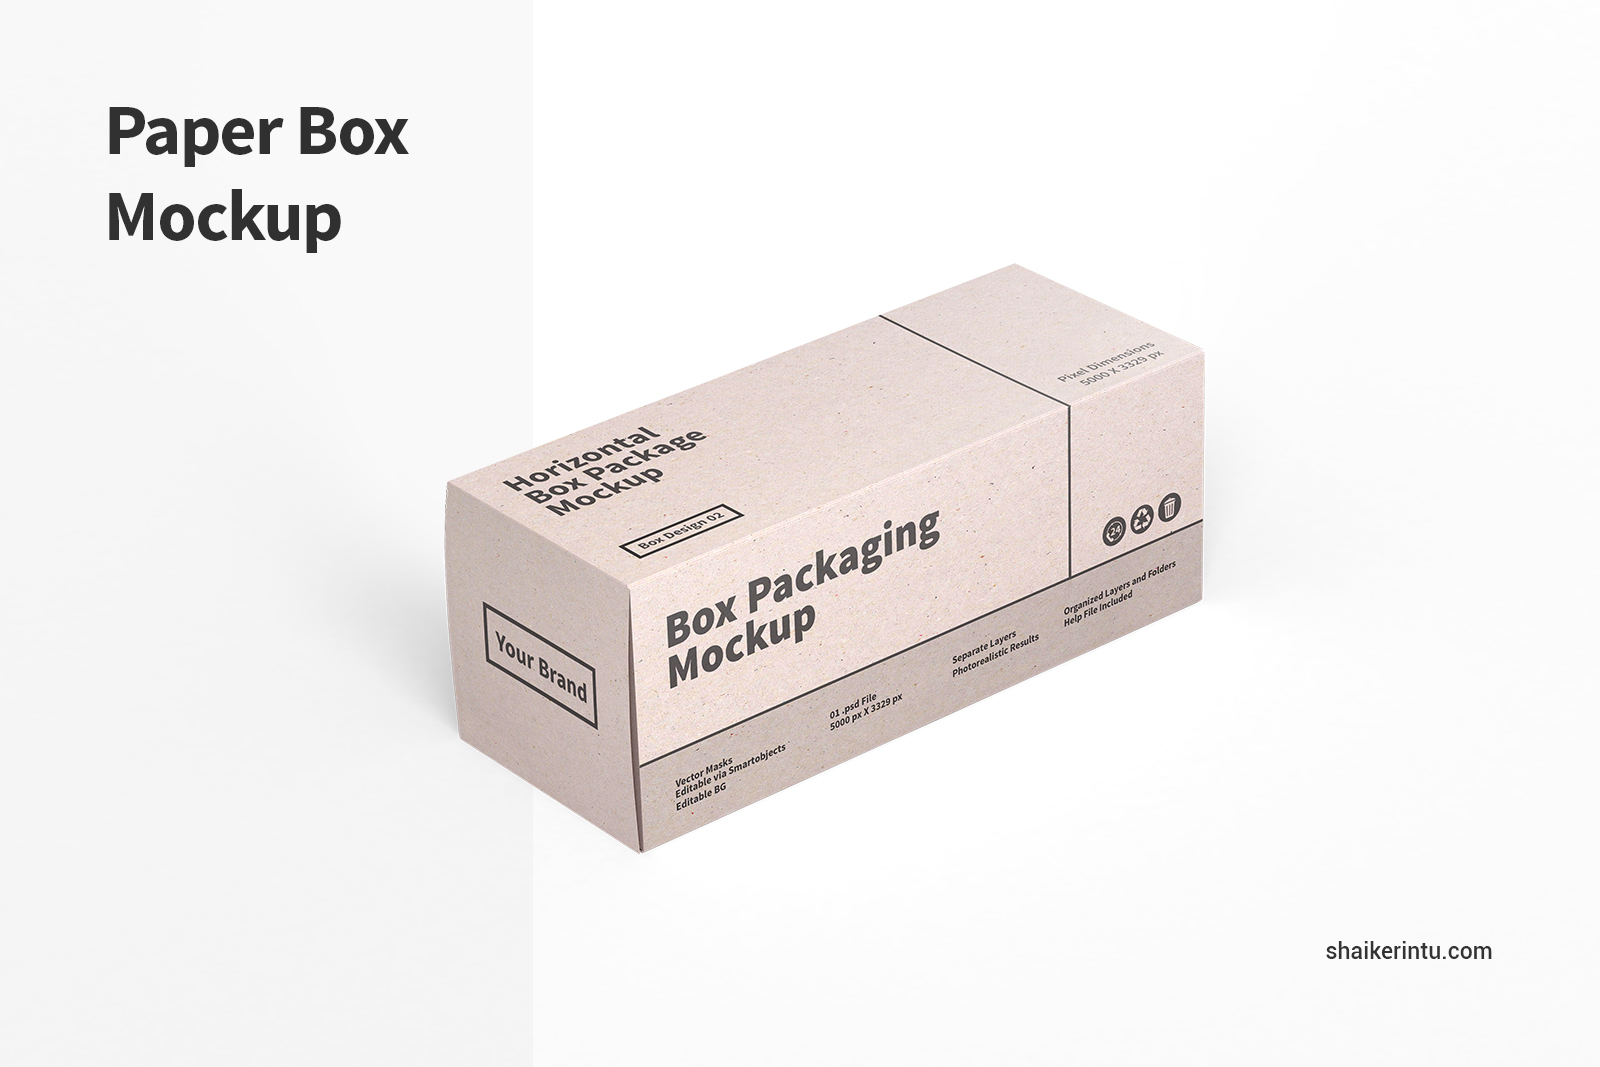 Download Get Face Mask Box Mockup Free Pics Yellowimages - Free PSD ...